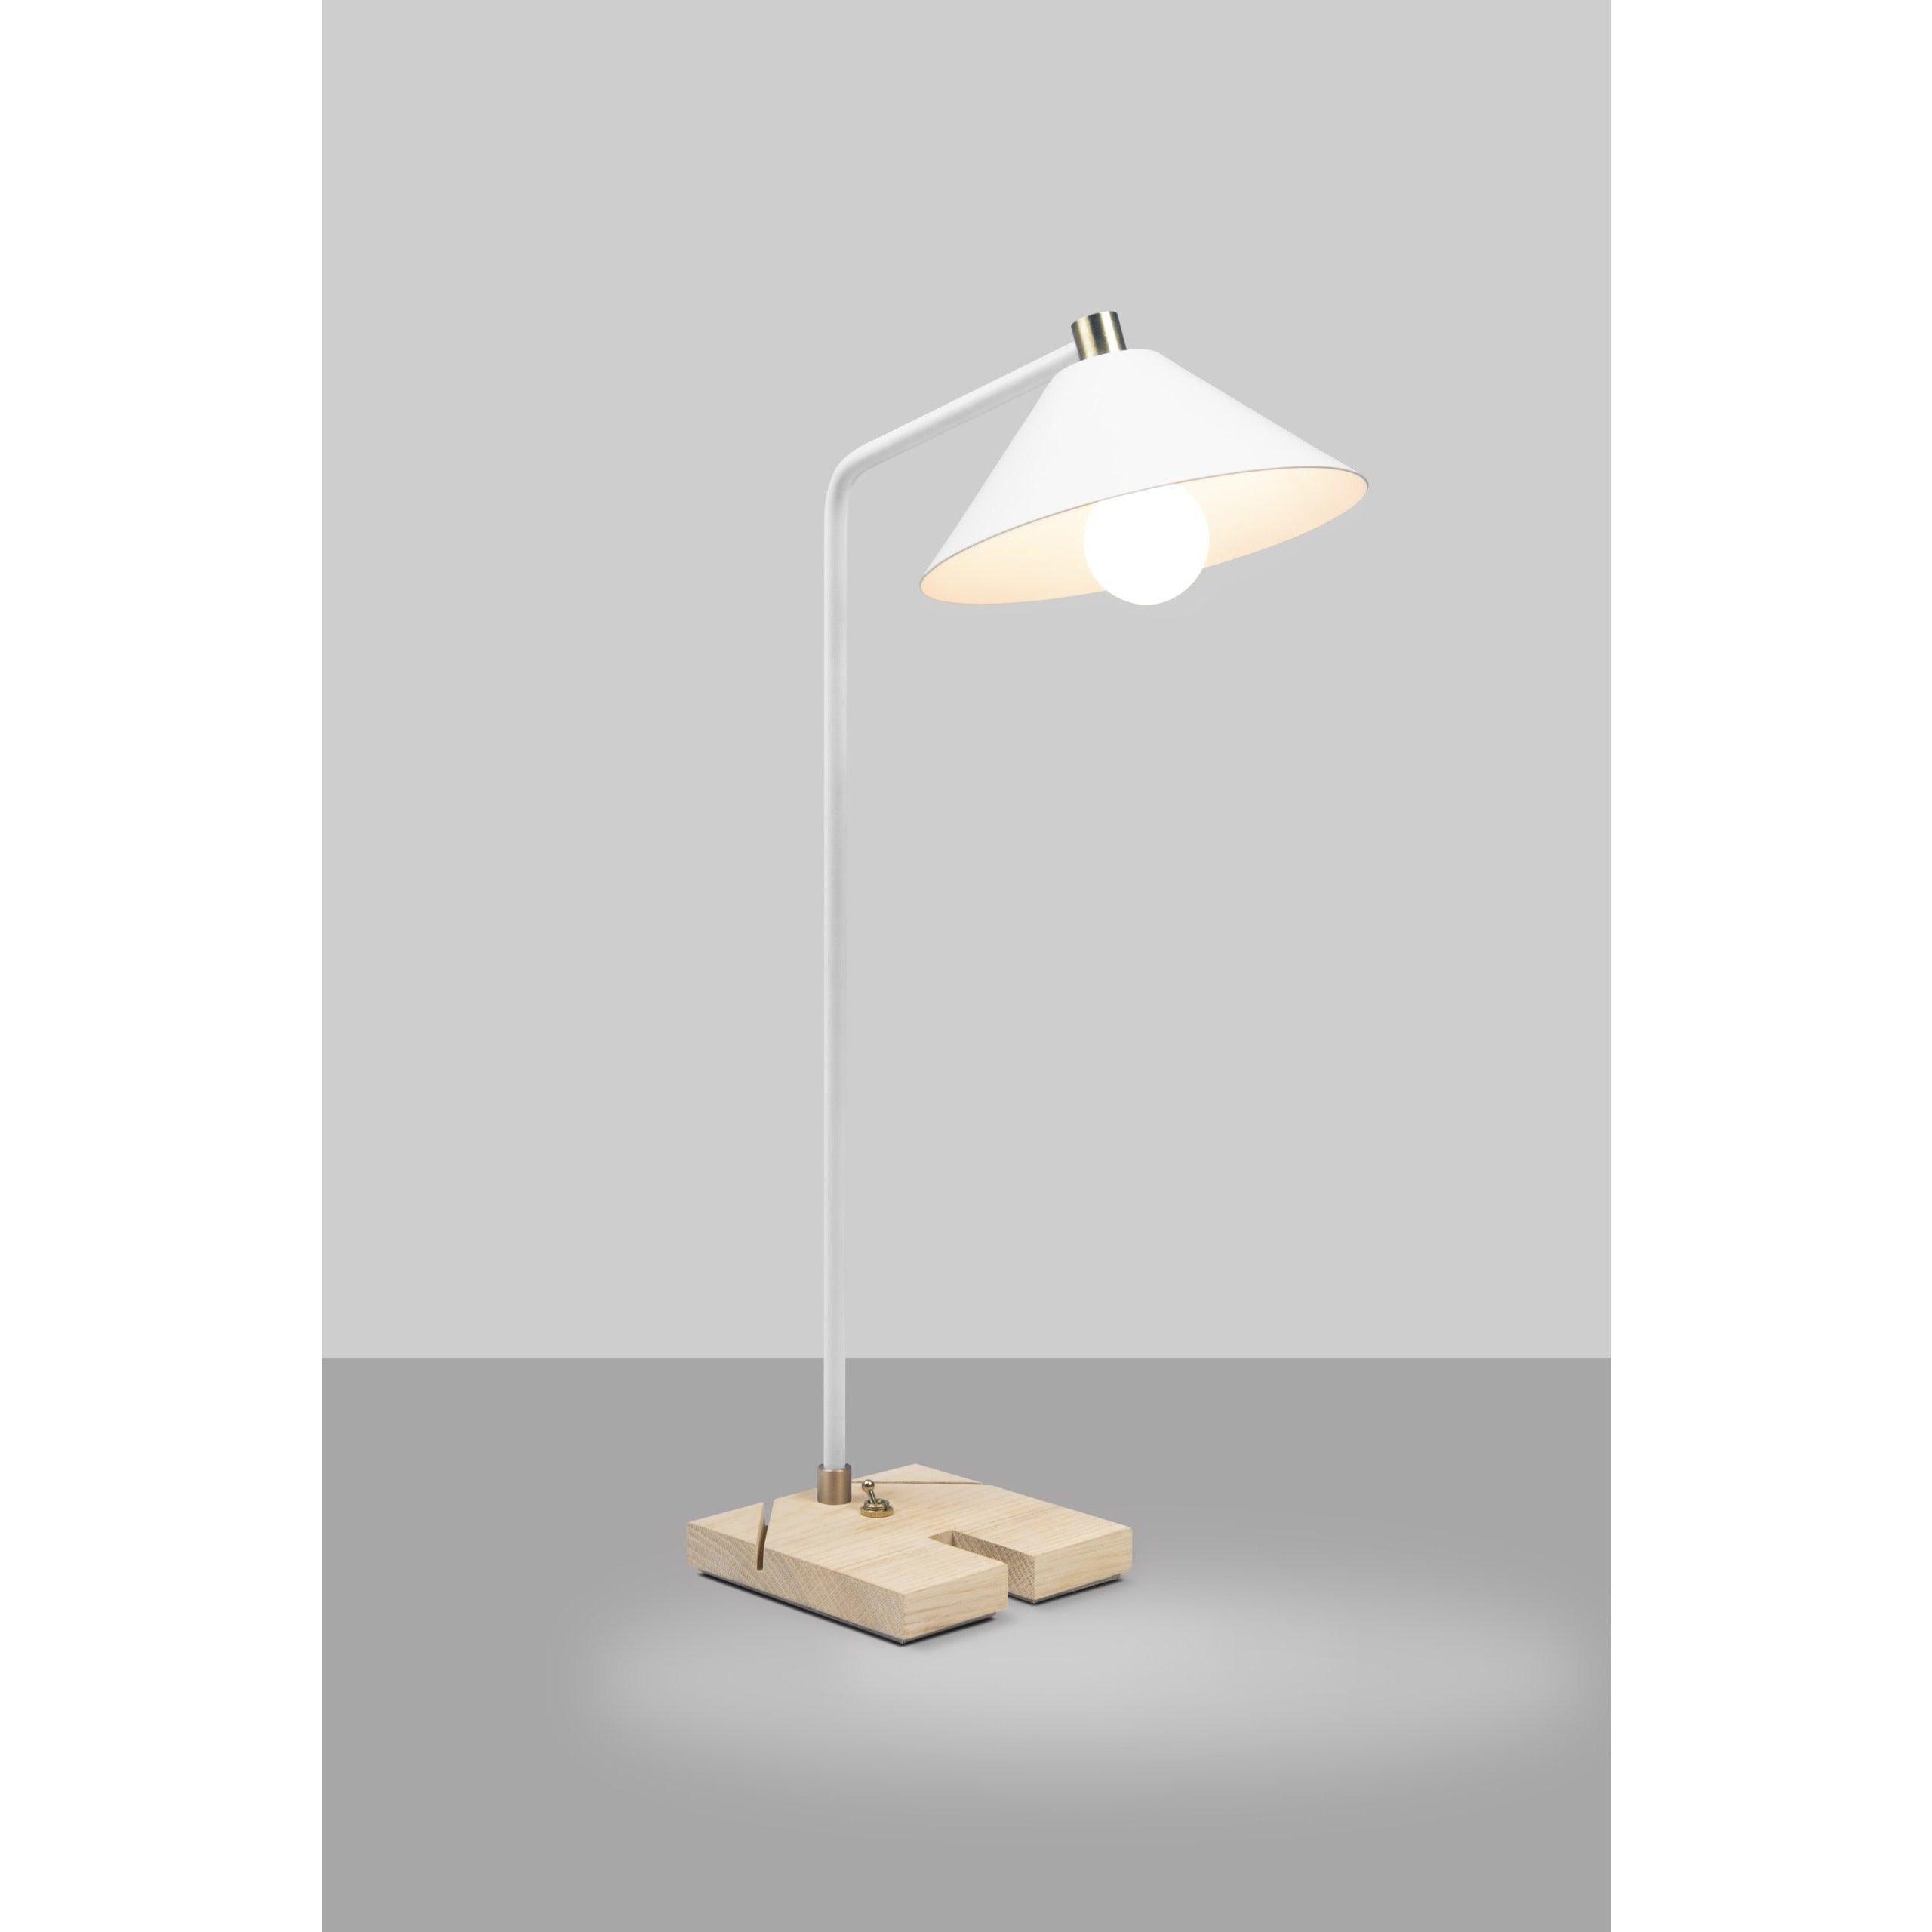 Cerno - Adesse LED Table Lamp - 02-170-WO | Montreal Lighting & Hardware